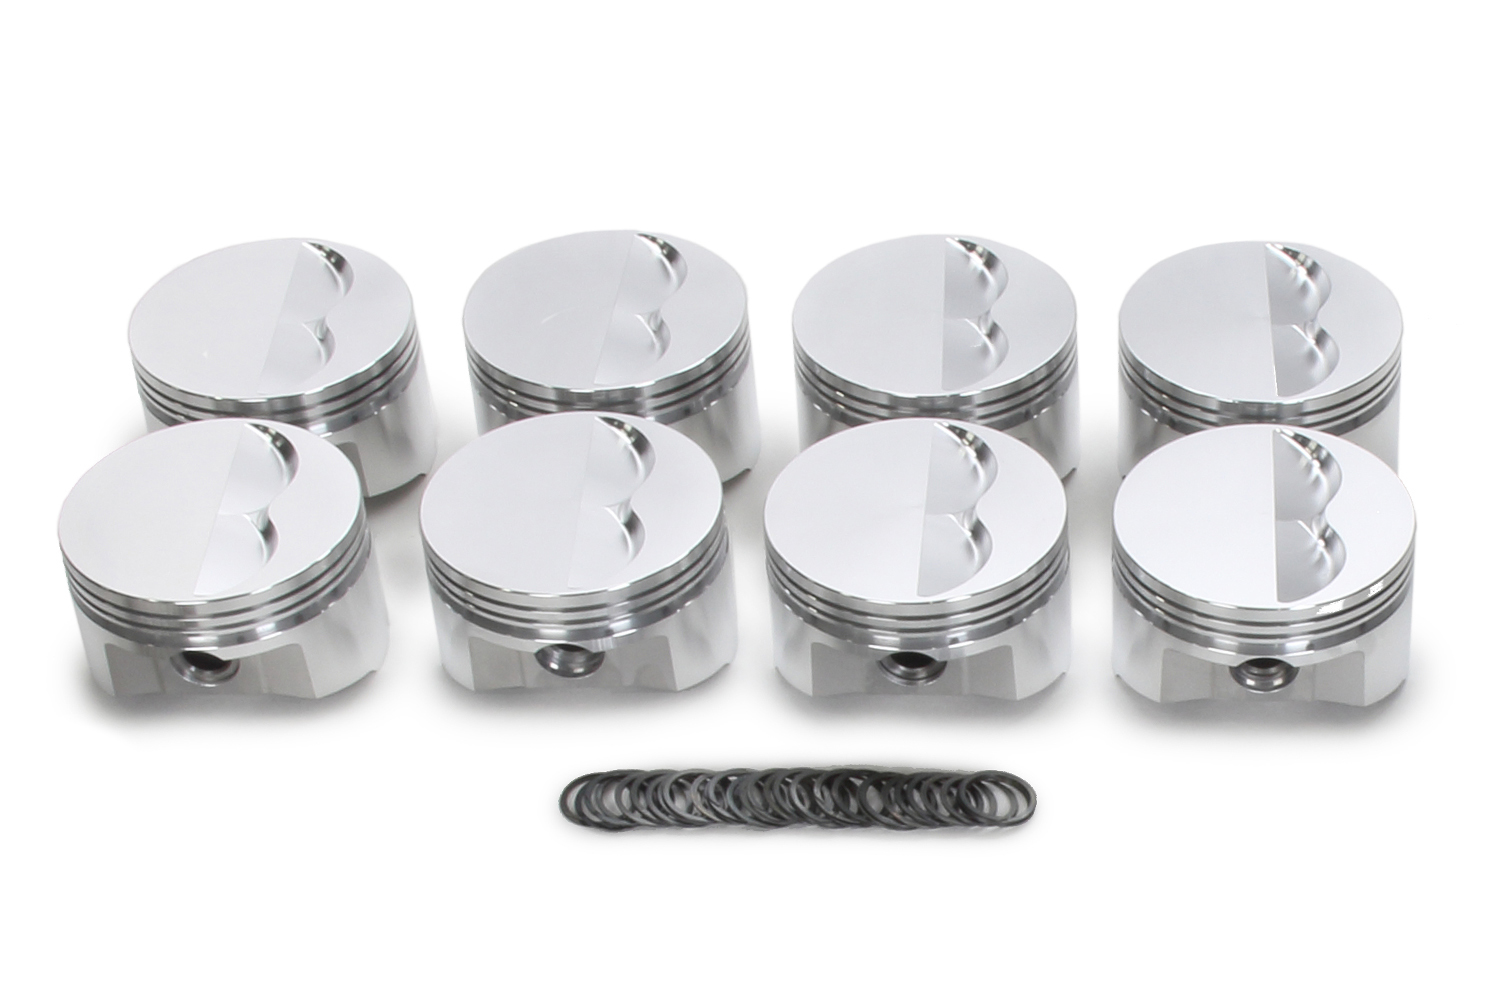 SRP Pistons 138101 Piston, 400 Flat Top, Forged, 4.165 in Bore, 1/16 x 1/16 x 3/16 in Ring Grooves, Minus 5.00 cc, Small Block Chevy, Set of 8